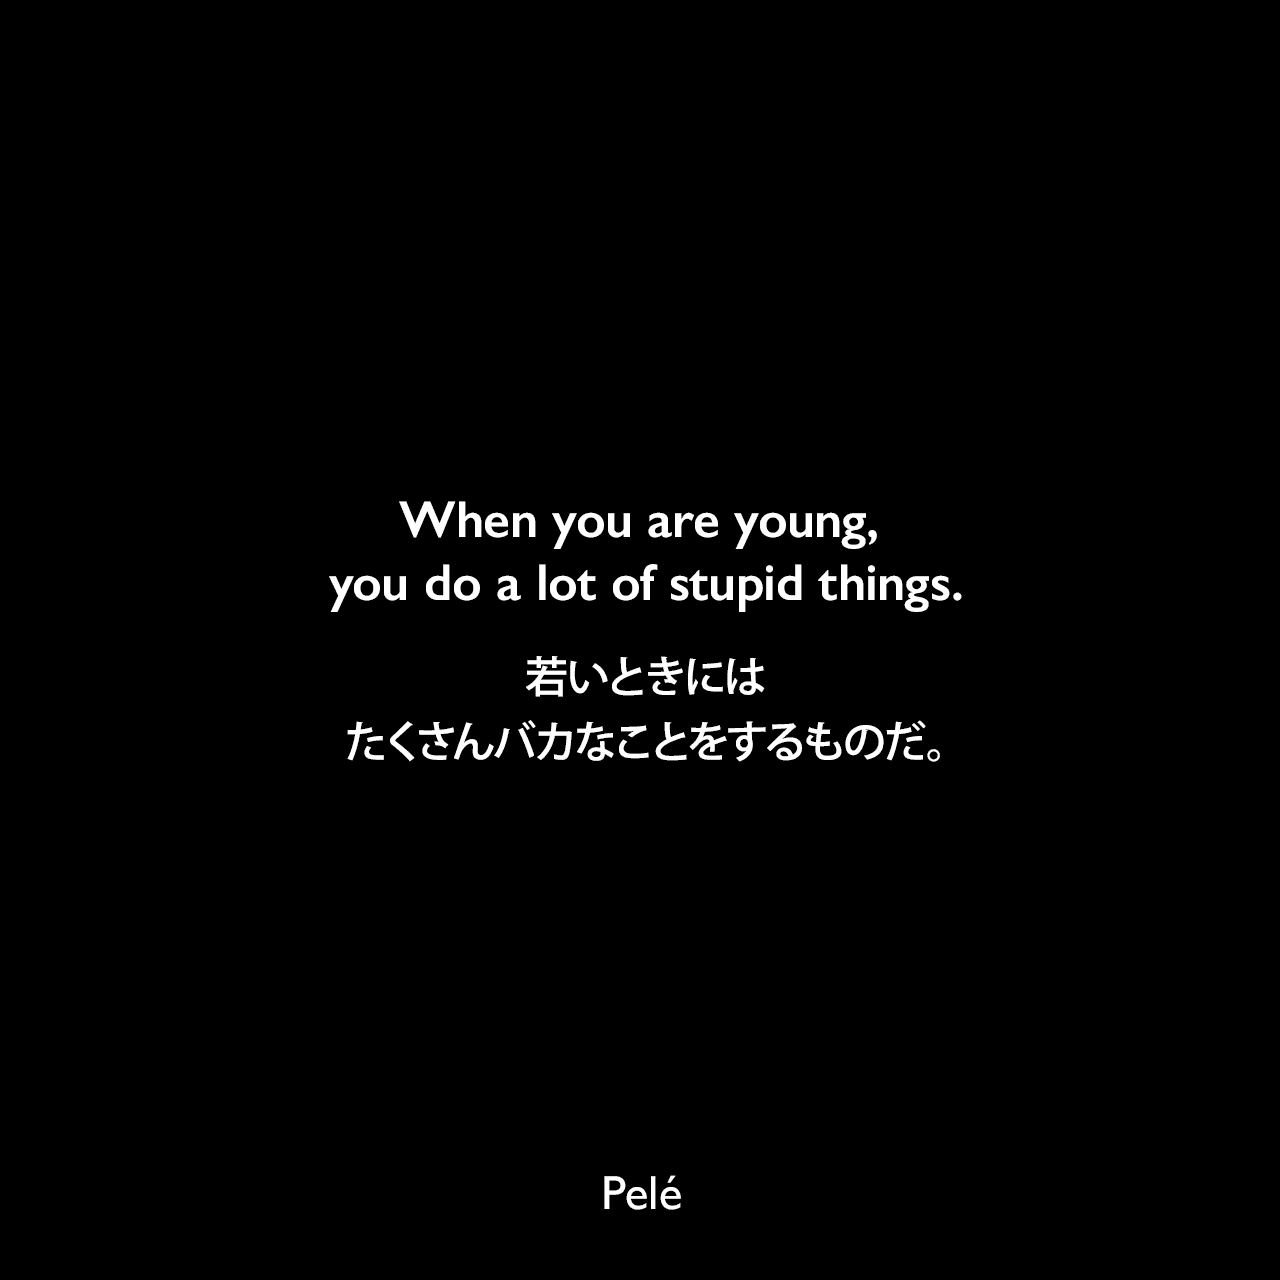 When you are young, you do a lot of stupid things.若いときには、たくさんバカなことをするものだ。Pelé